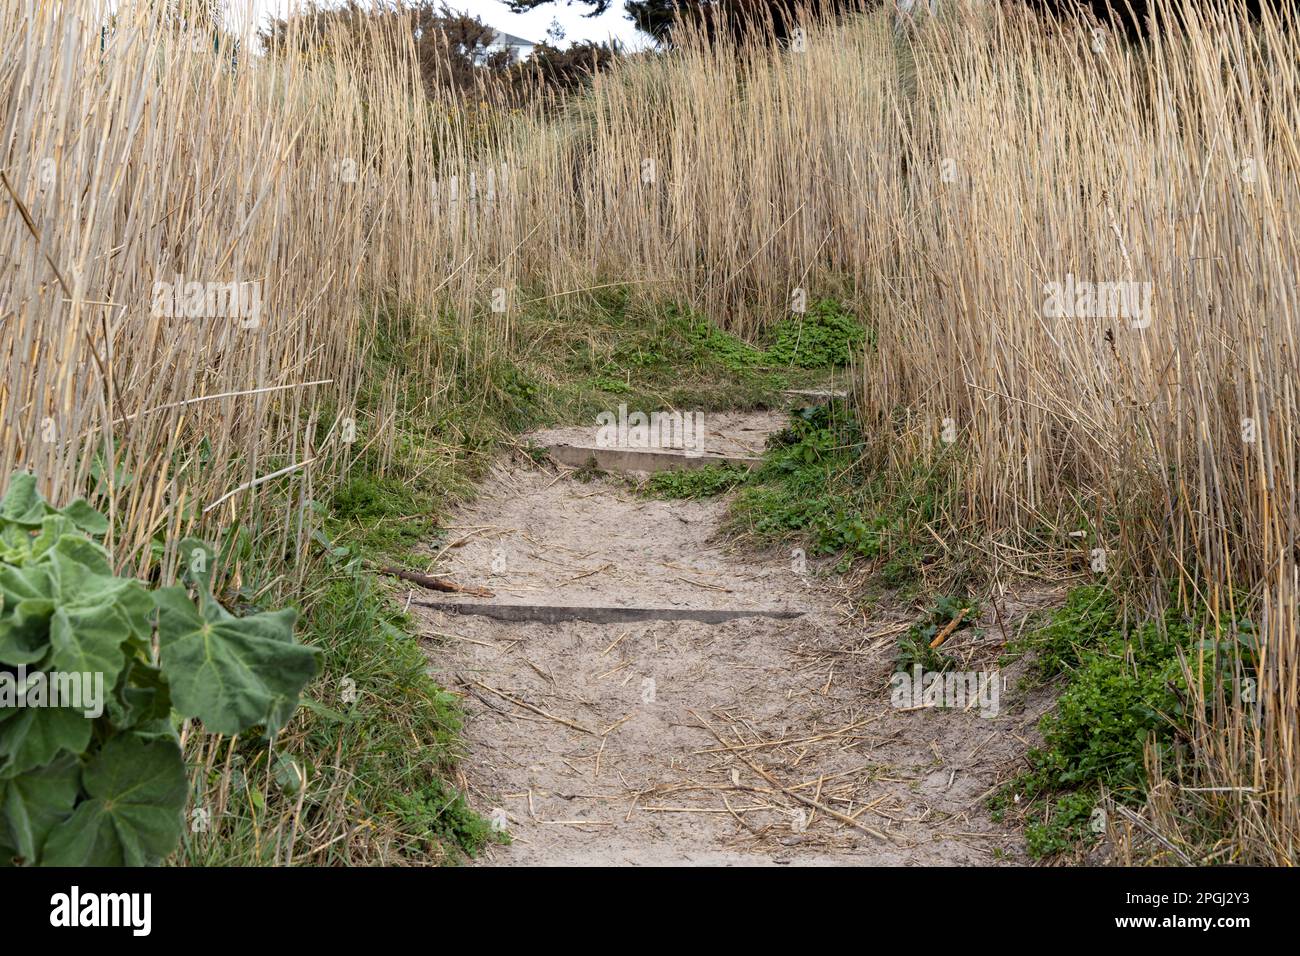 Rough ground with steps and tall reeds Stock Photo